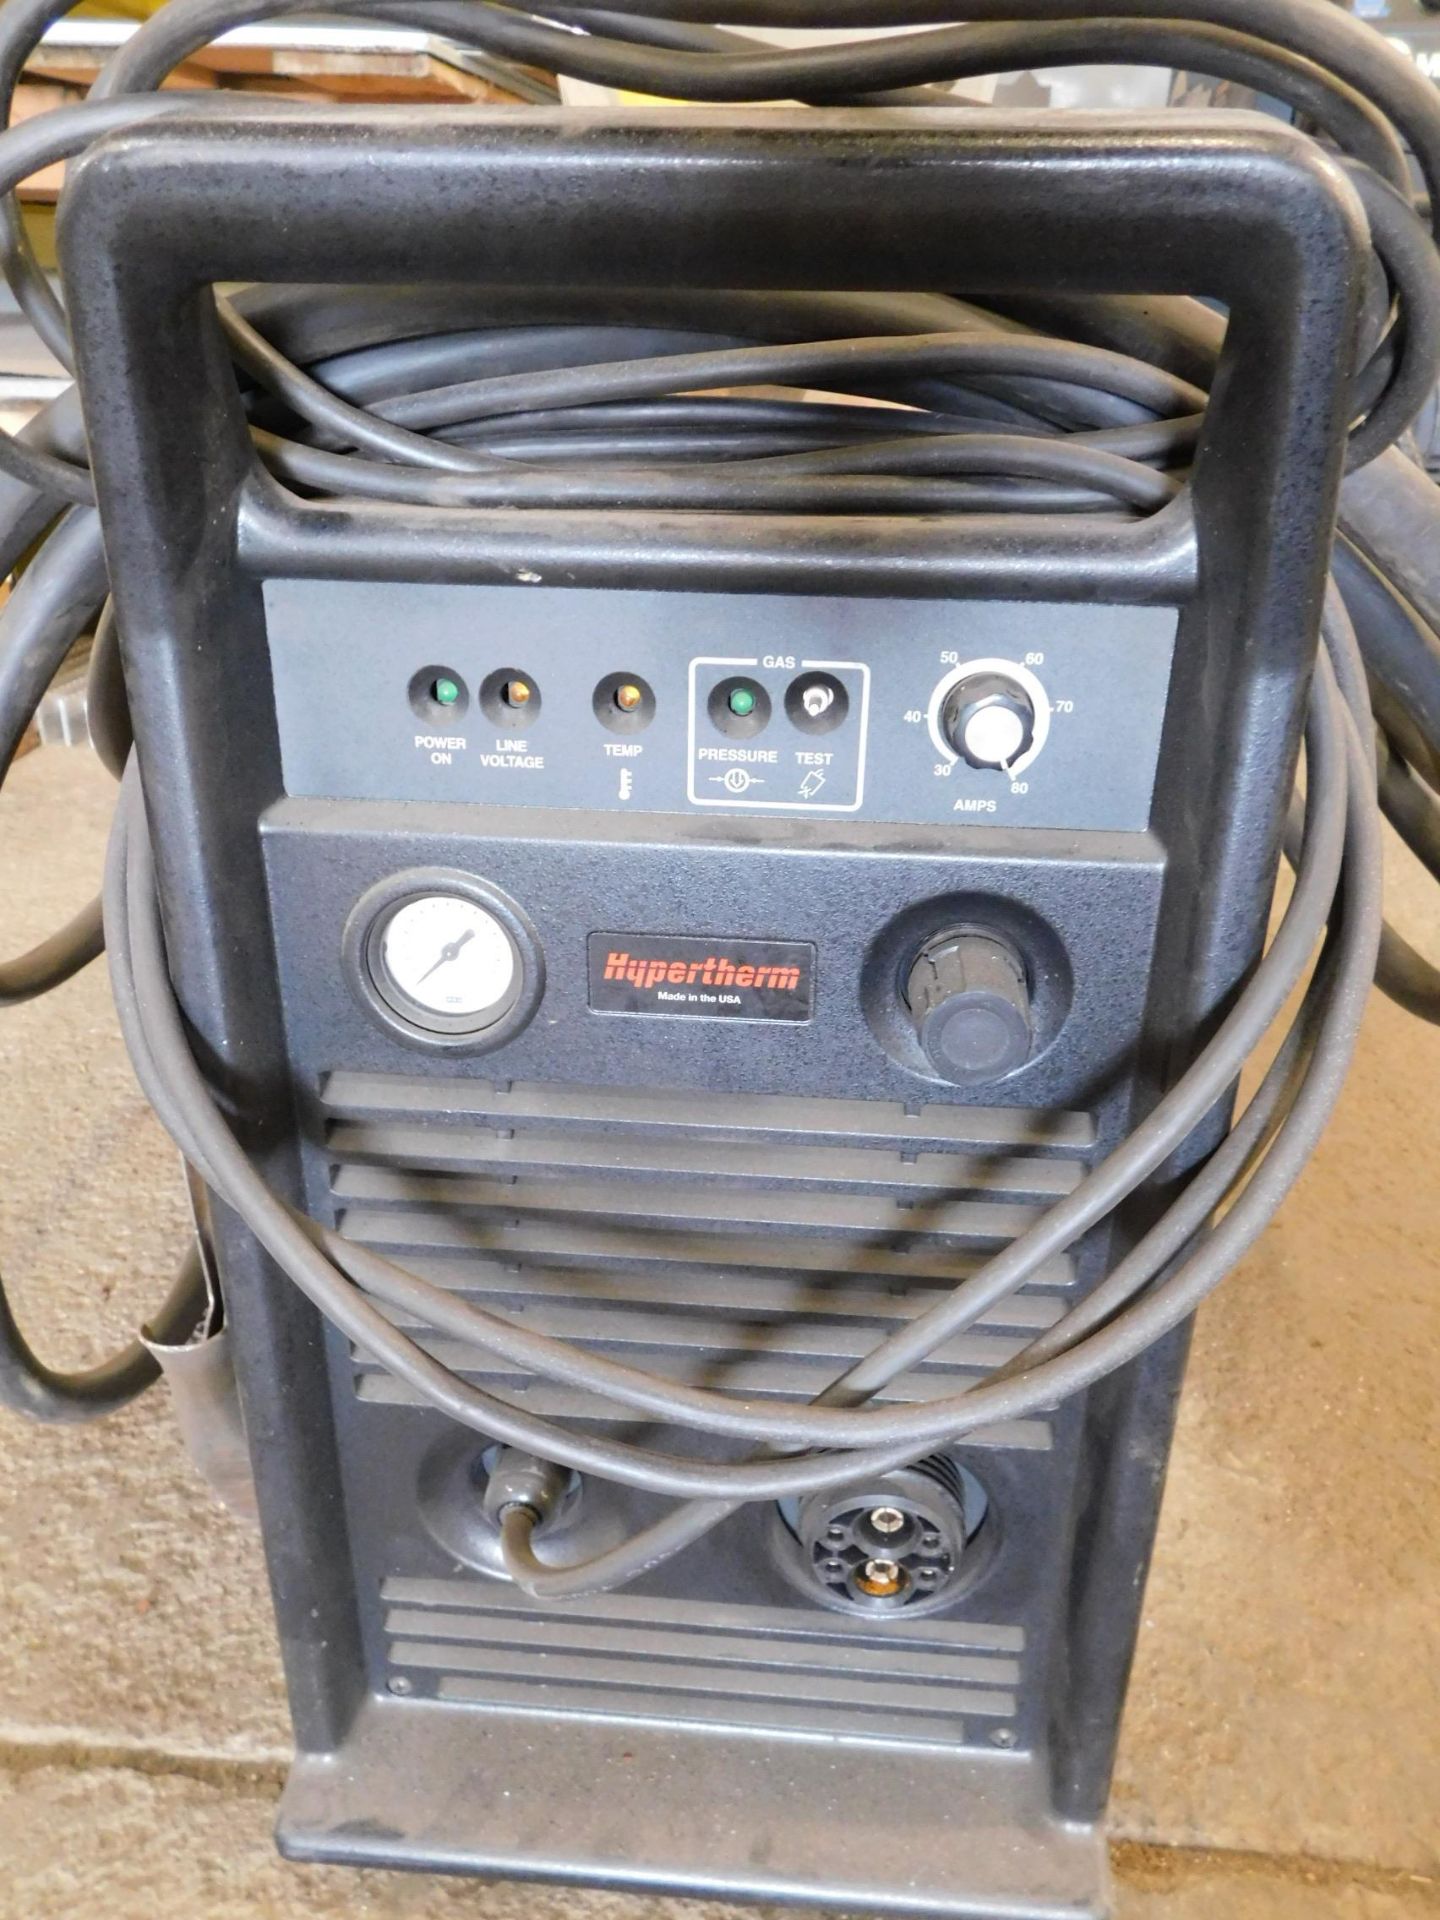 Hypertherm Powermax 1100 Plasma Cutter, SN 1100-016386, 208/240/480V, 1 Phase or 3 Phase - Image 2 of 6